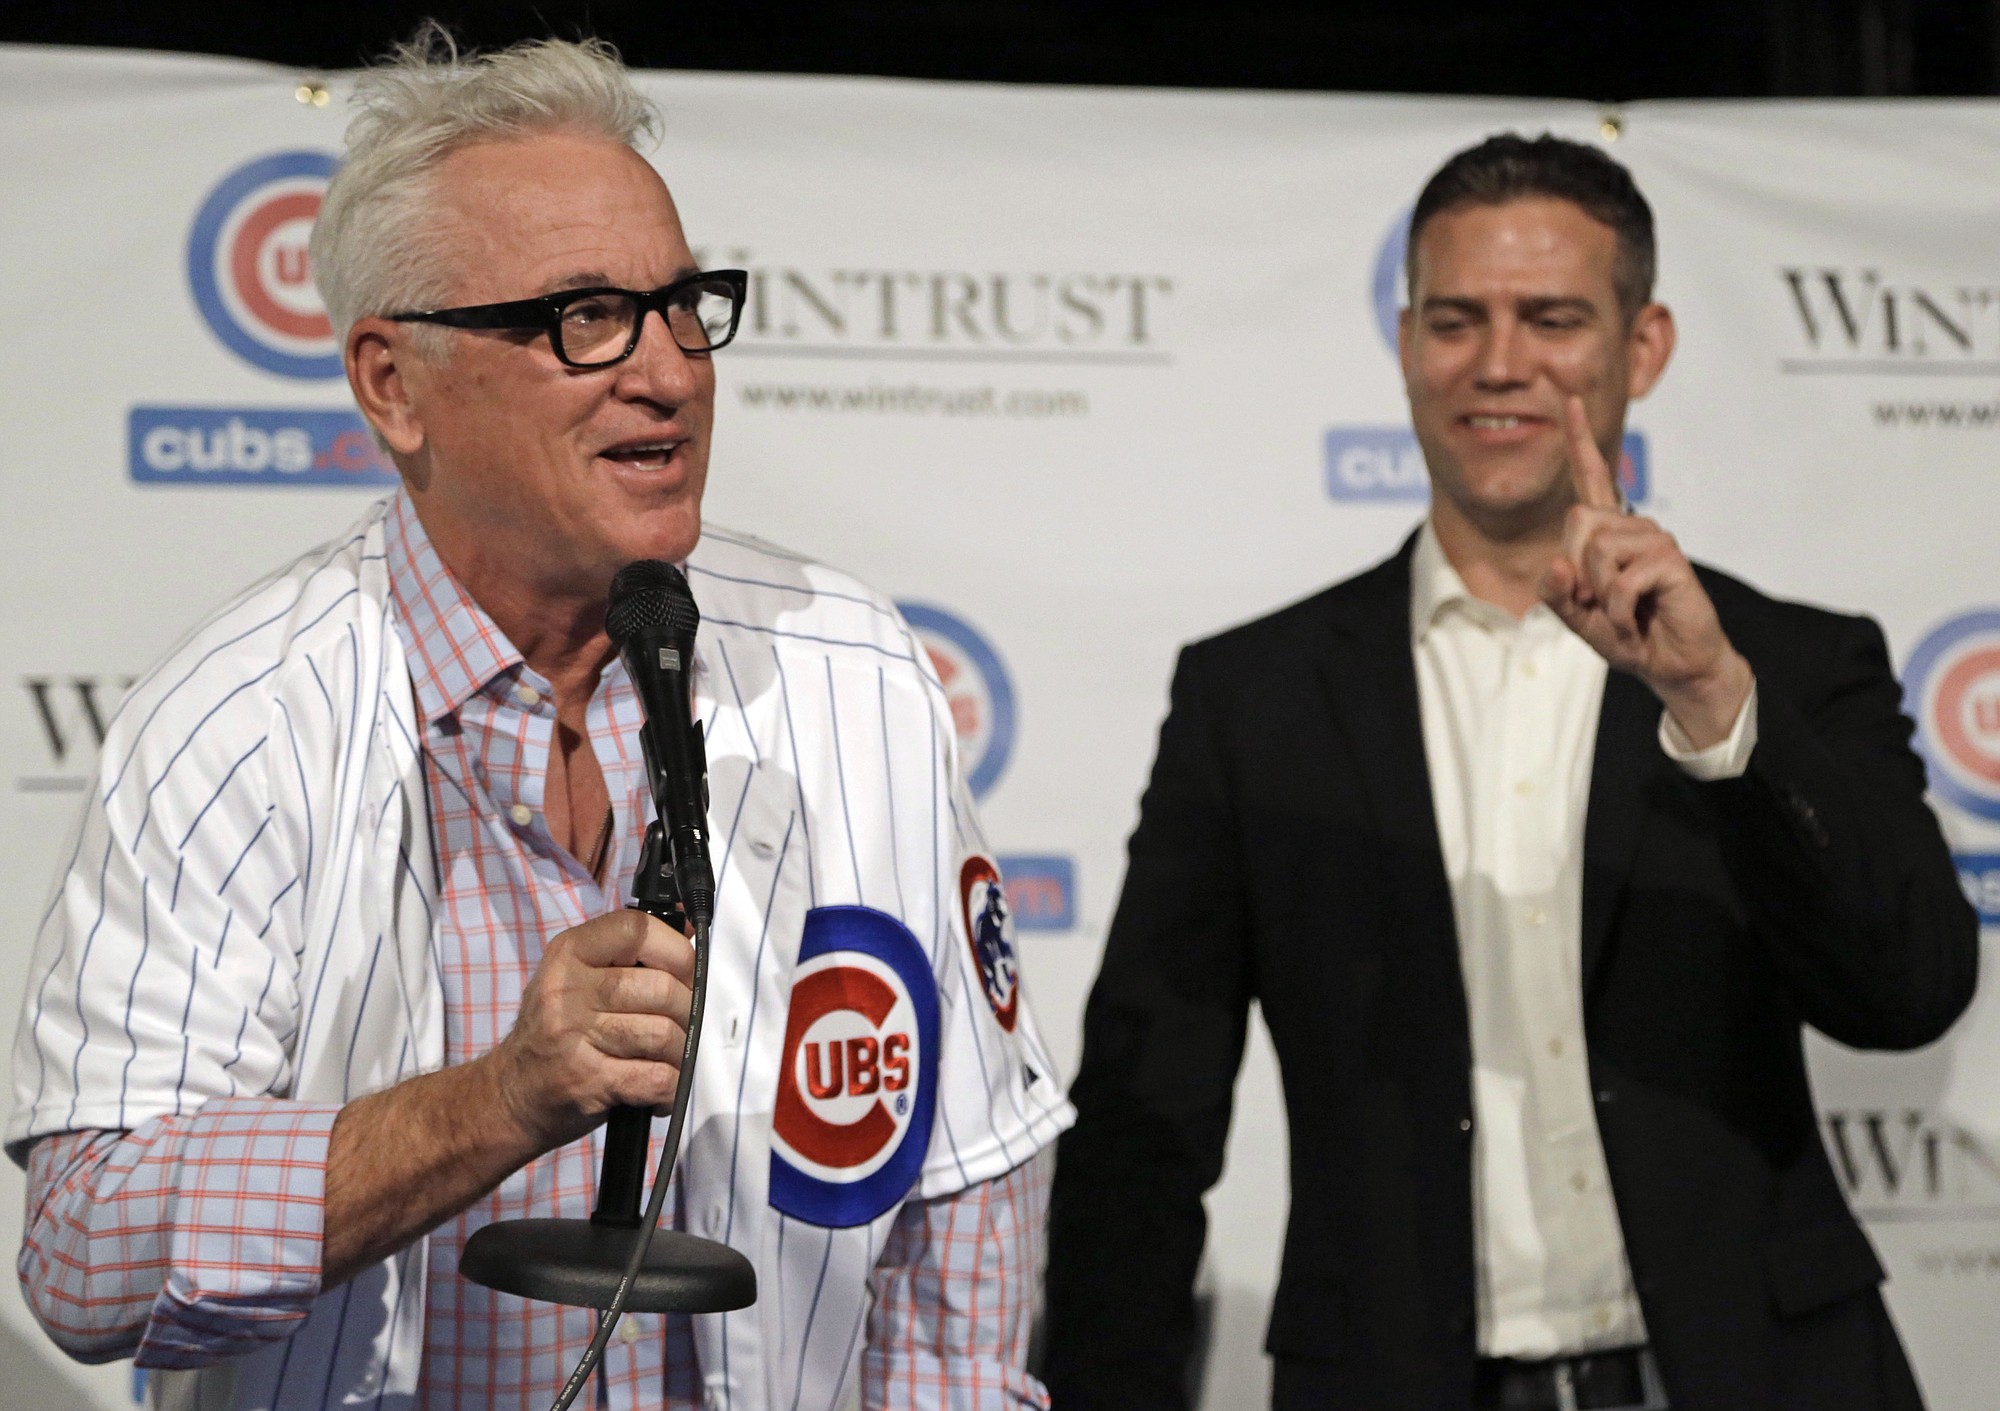 New Chicago Cubs manager Joe Maddon, left, offers to buy a round of drinks after being named manager of the Chicago Cubs baseball team at The Cubby Bear across the street from Wrigley Field, Monday, Nov. 3, 2014, in Chicago as Theo Epstein, president of baseball operations tells him only one round. (AP Photo/M.